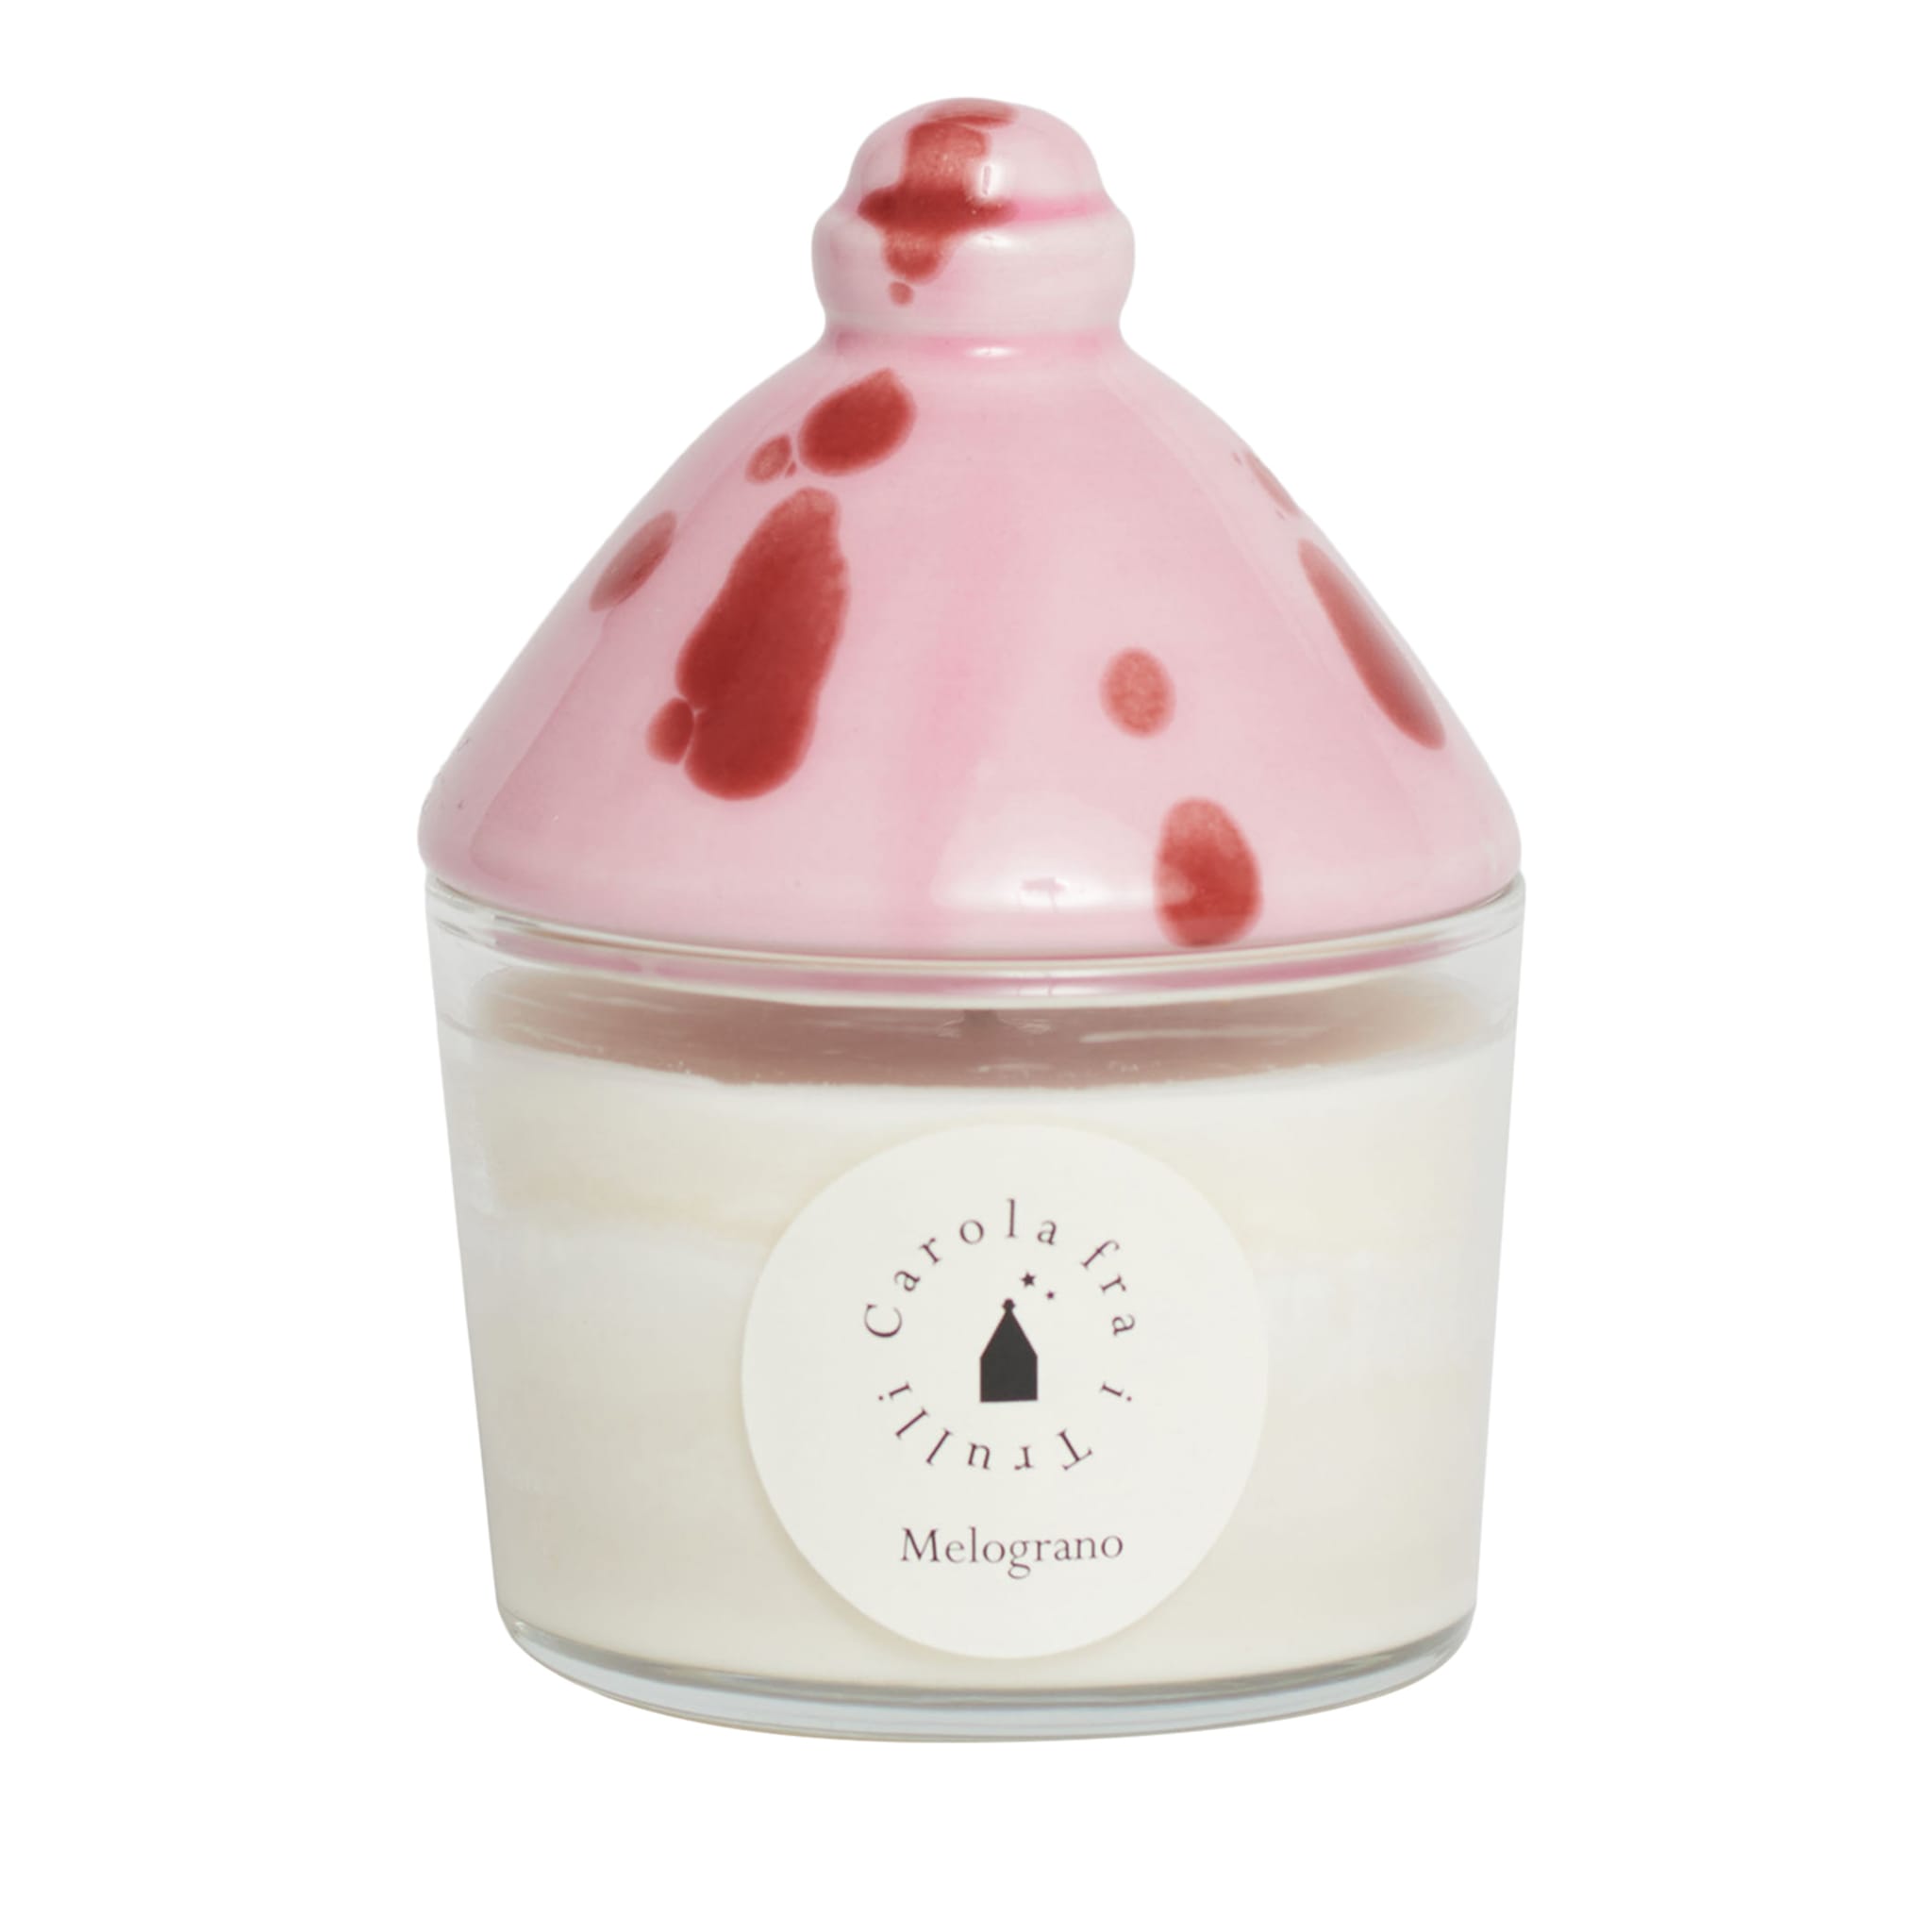 Melograno Scented Candle with Ceramic Lid #2 - Main view